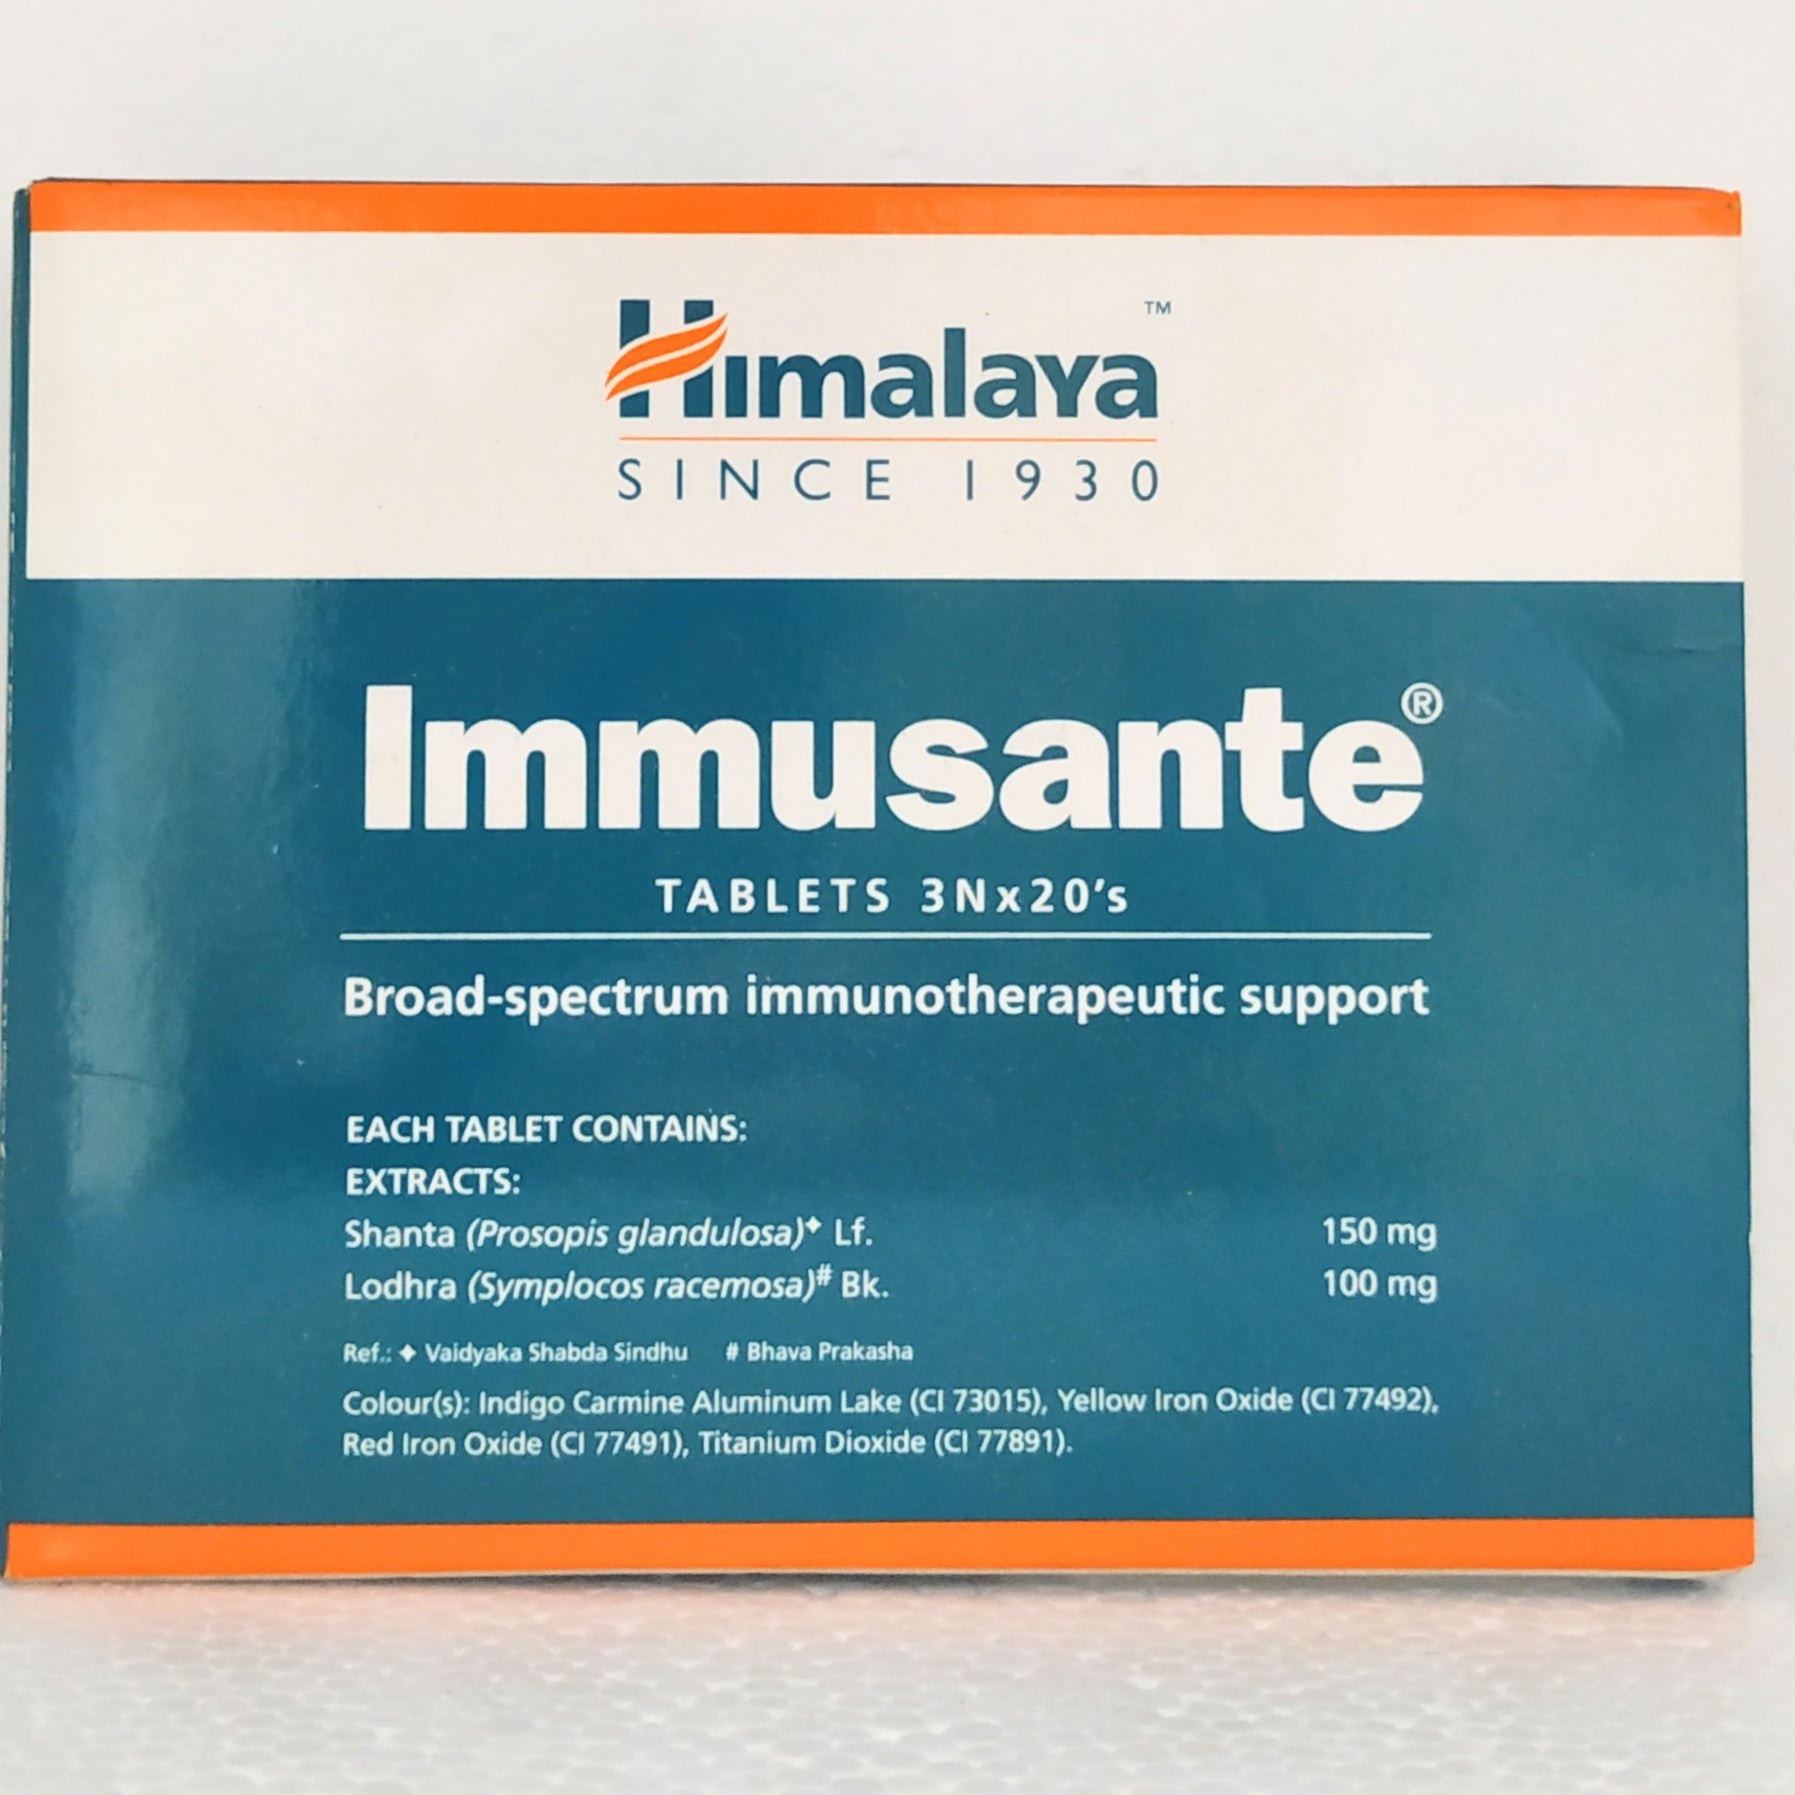 Shop Immusante tablets - 20Tablets at price 80.00 from Himalaya Online - Ayush Care